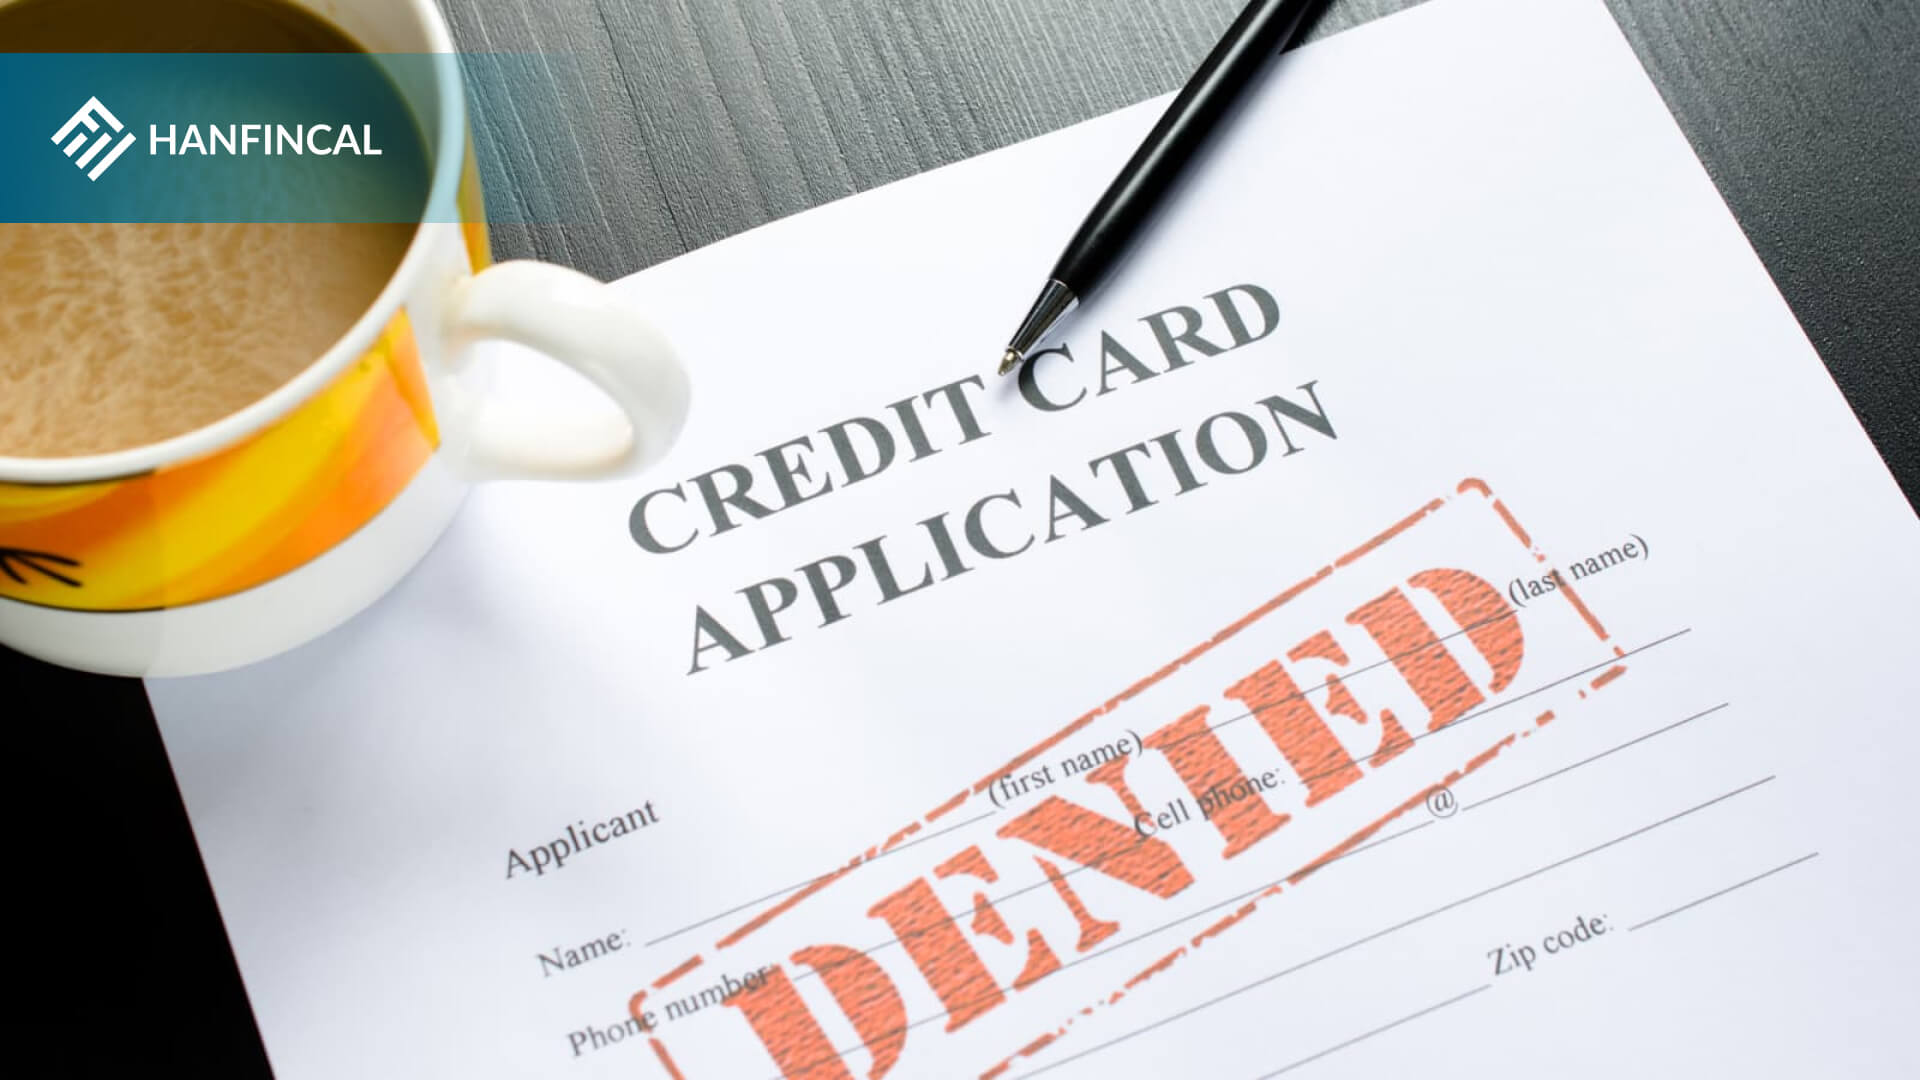 What happens if your credit card application is denied?